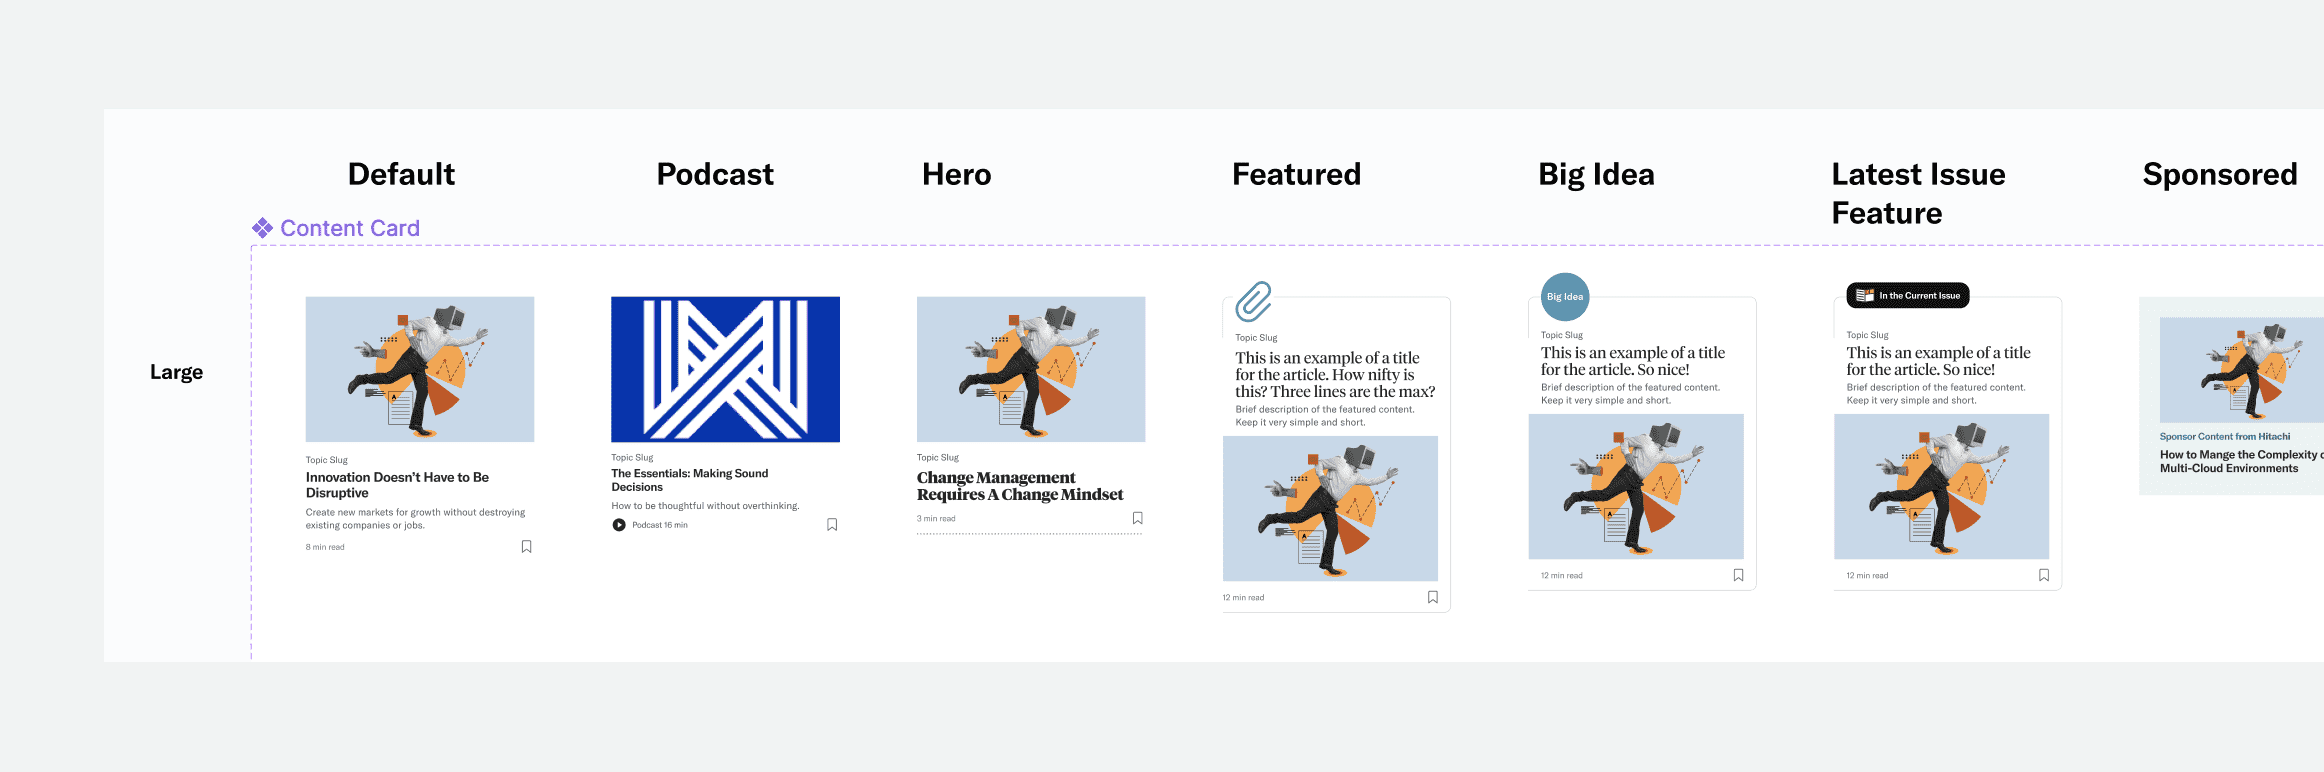 Various text and input styles used while designing the HBR app.